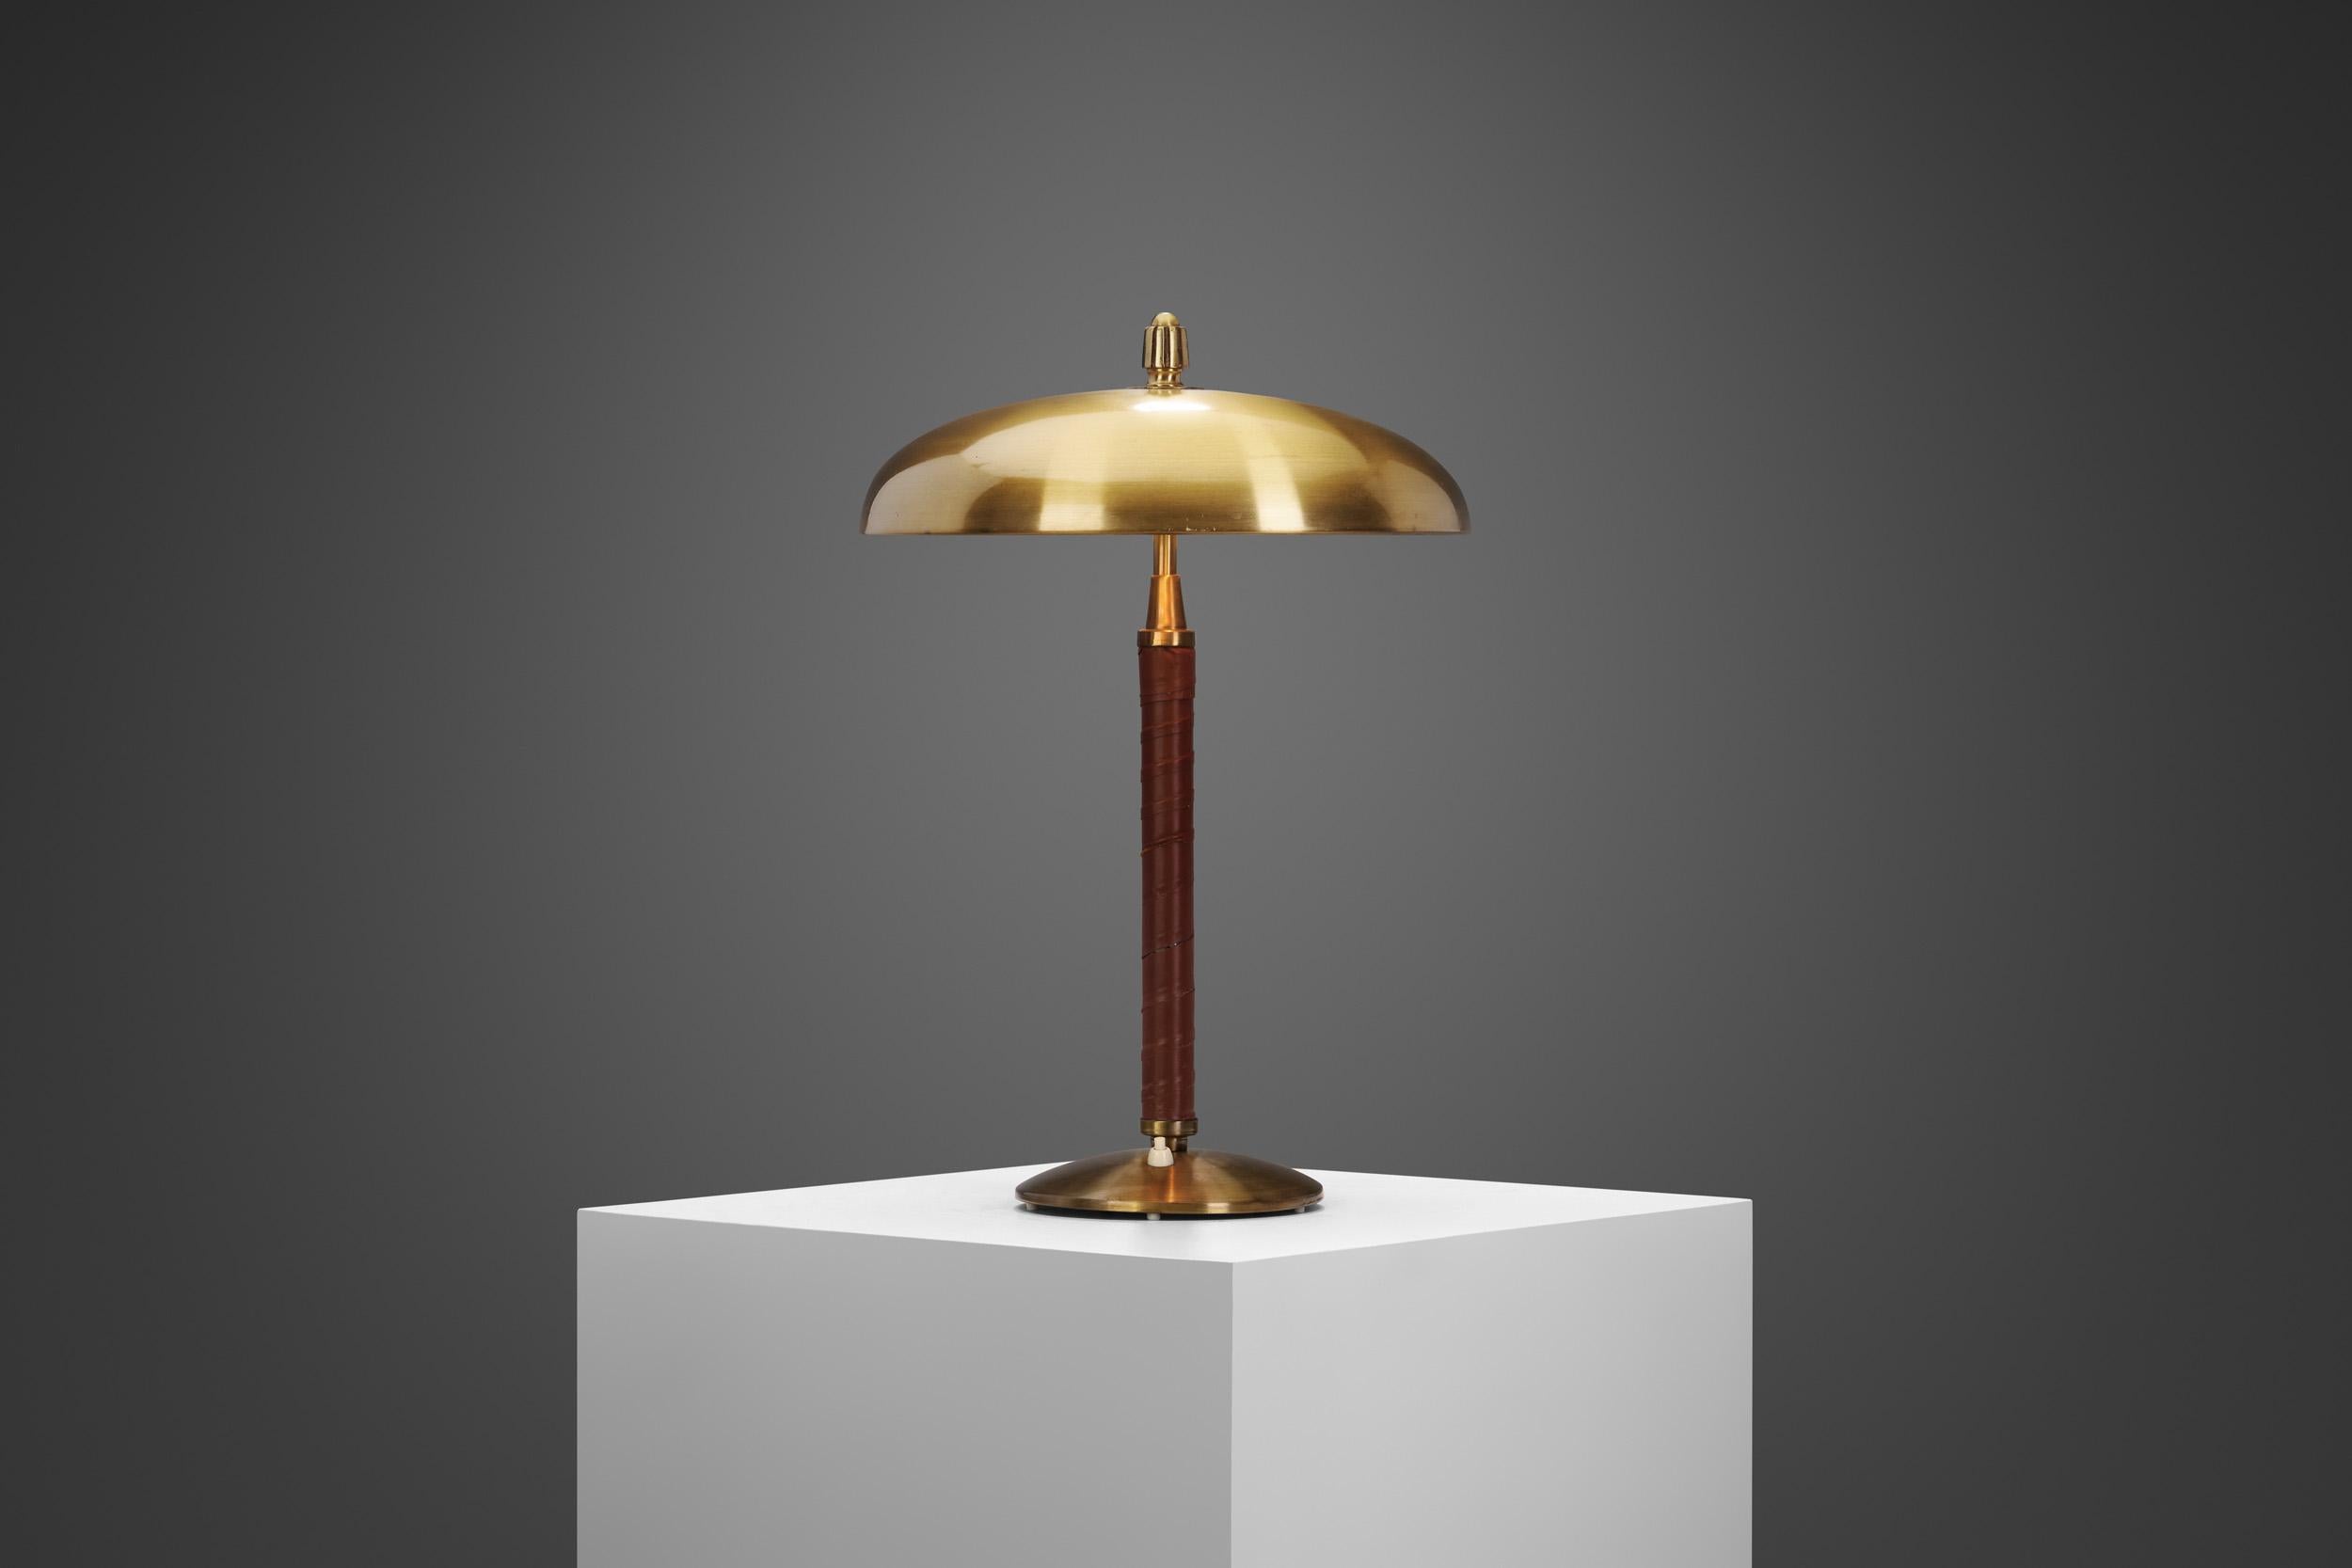 This stylish table lamp is a delightfully distinctive model, with immediately recognizable details. According to the Museum of Malmö, Einar Bäckström founded his workshop in 1918 for the manufacture of lighting and ornaments, and as the museum